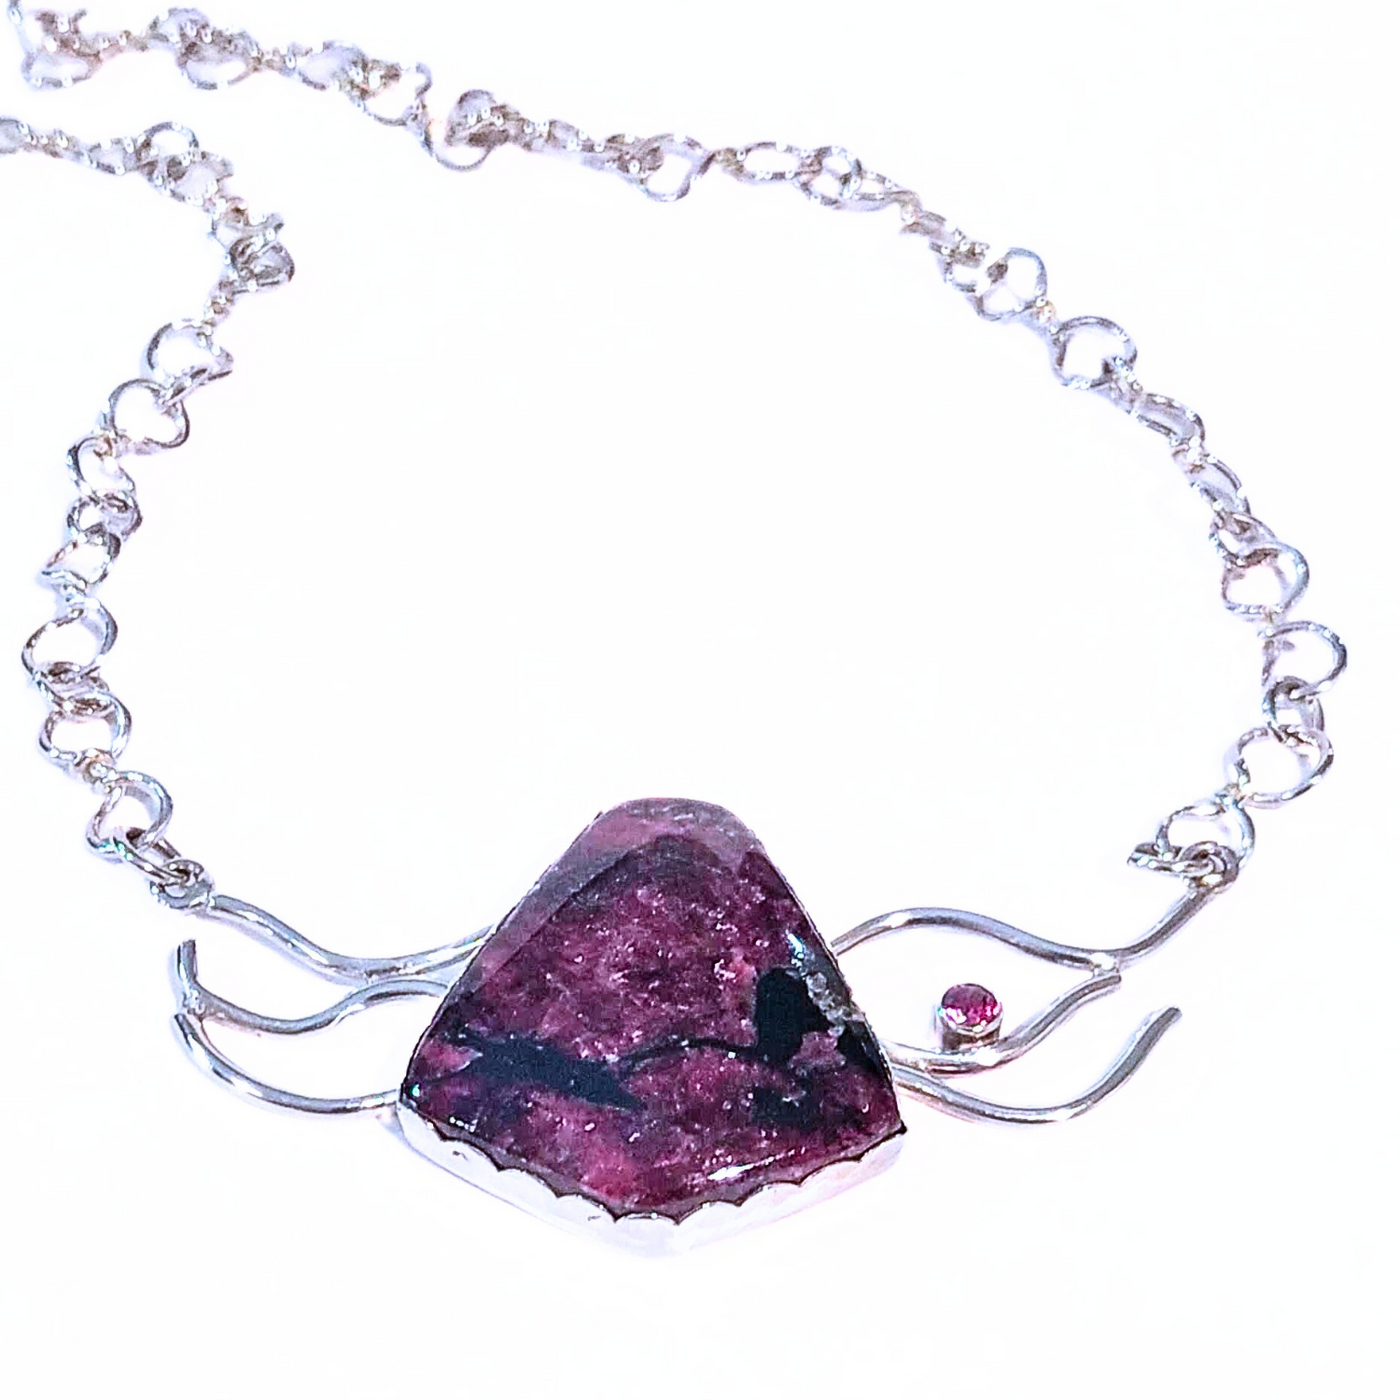 VC-093 - Eudialyte & Garnet Wave Pendant with Fine Silver Chain